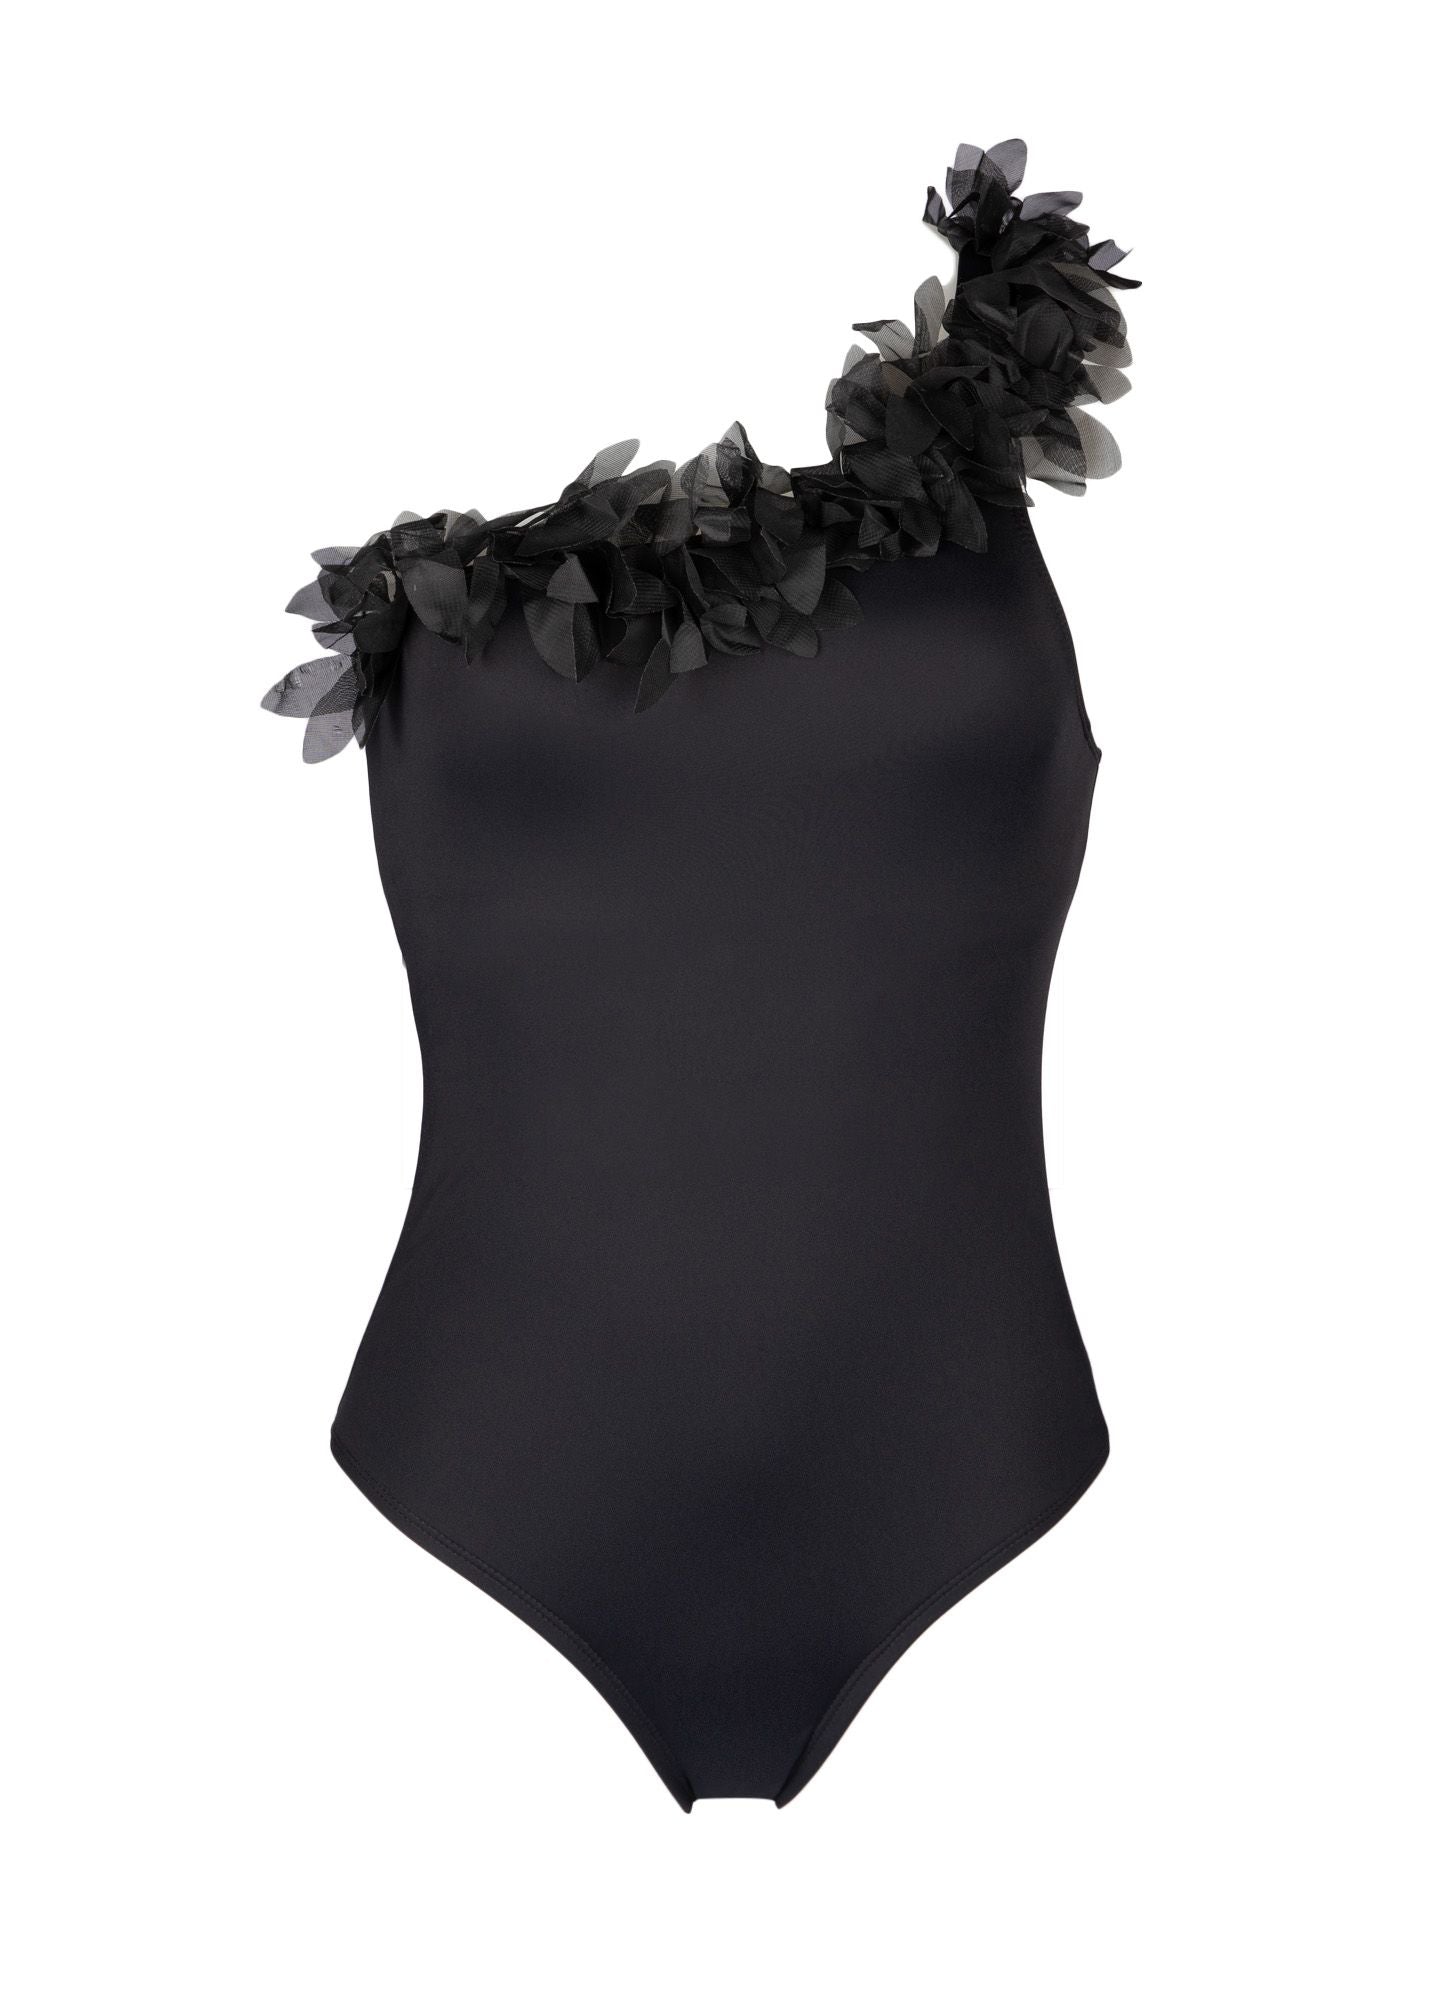 black asymmetrical one piece swimsuit with chiffon leaves